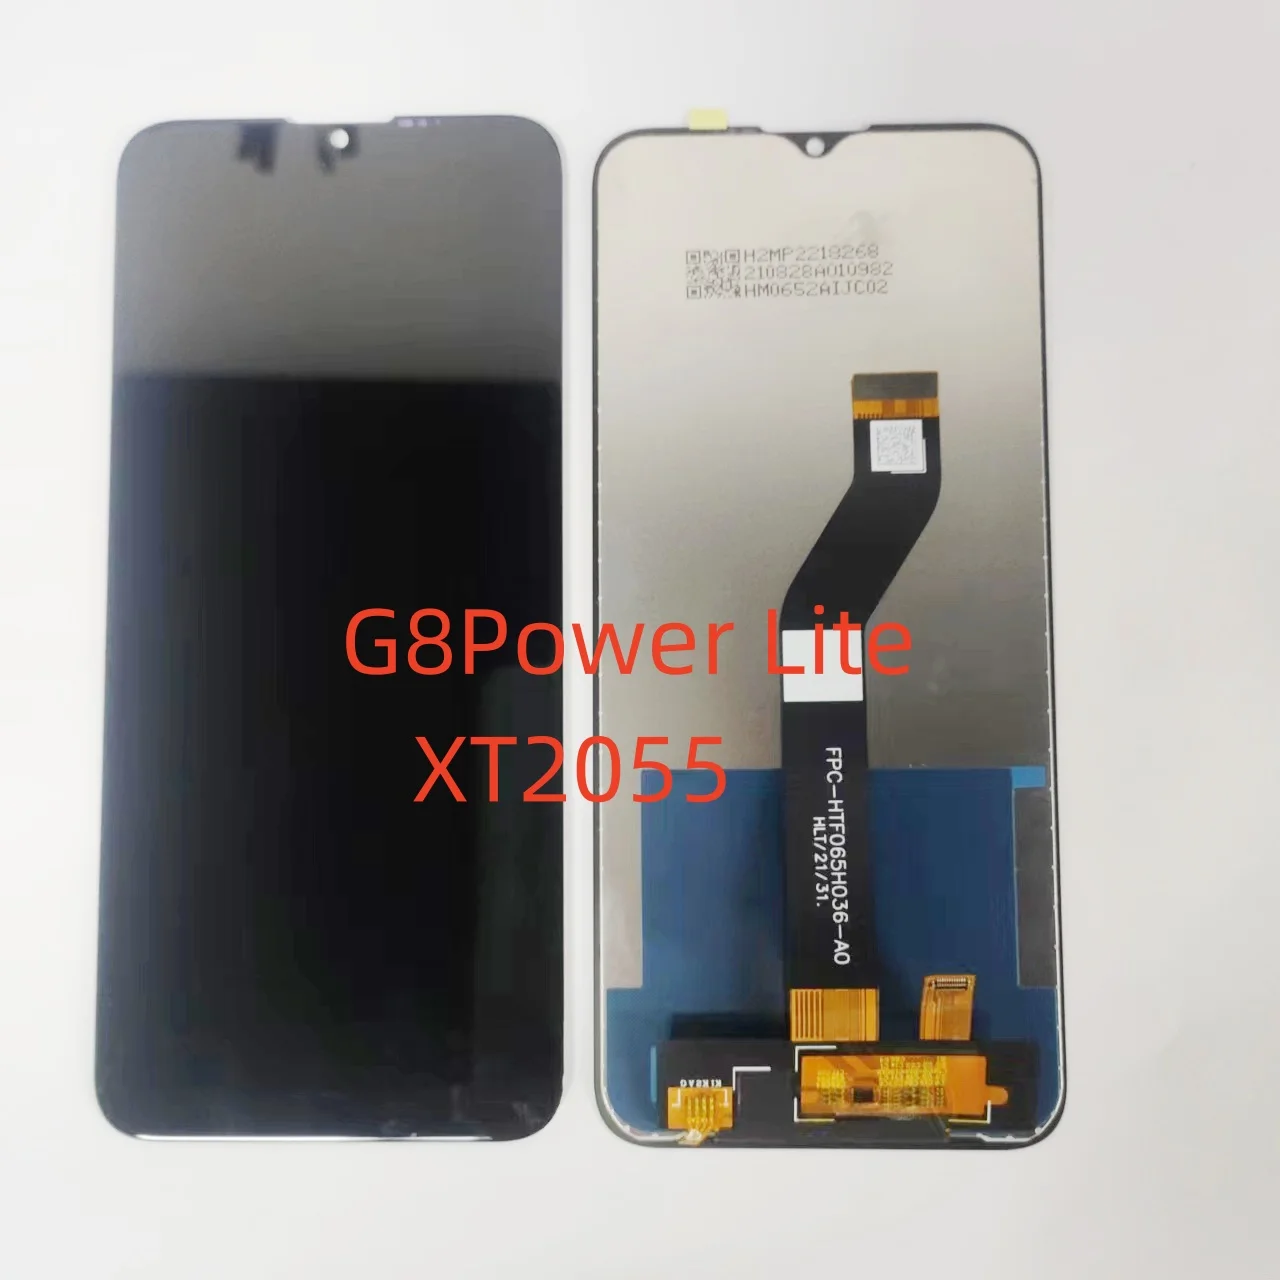 

10 Pcs/Lot for Motorola Moto G8 Power Lite XT2055 LCD Screen Display with Touch Digitizer Assembly